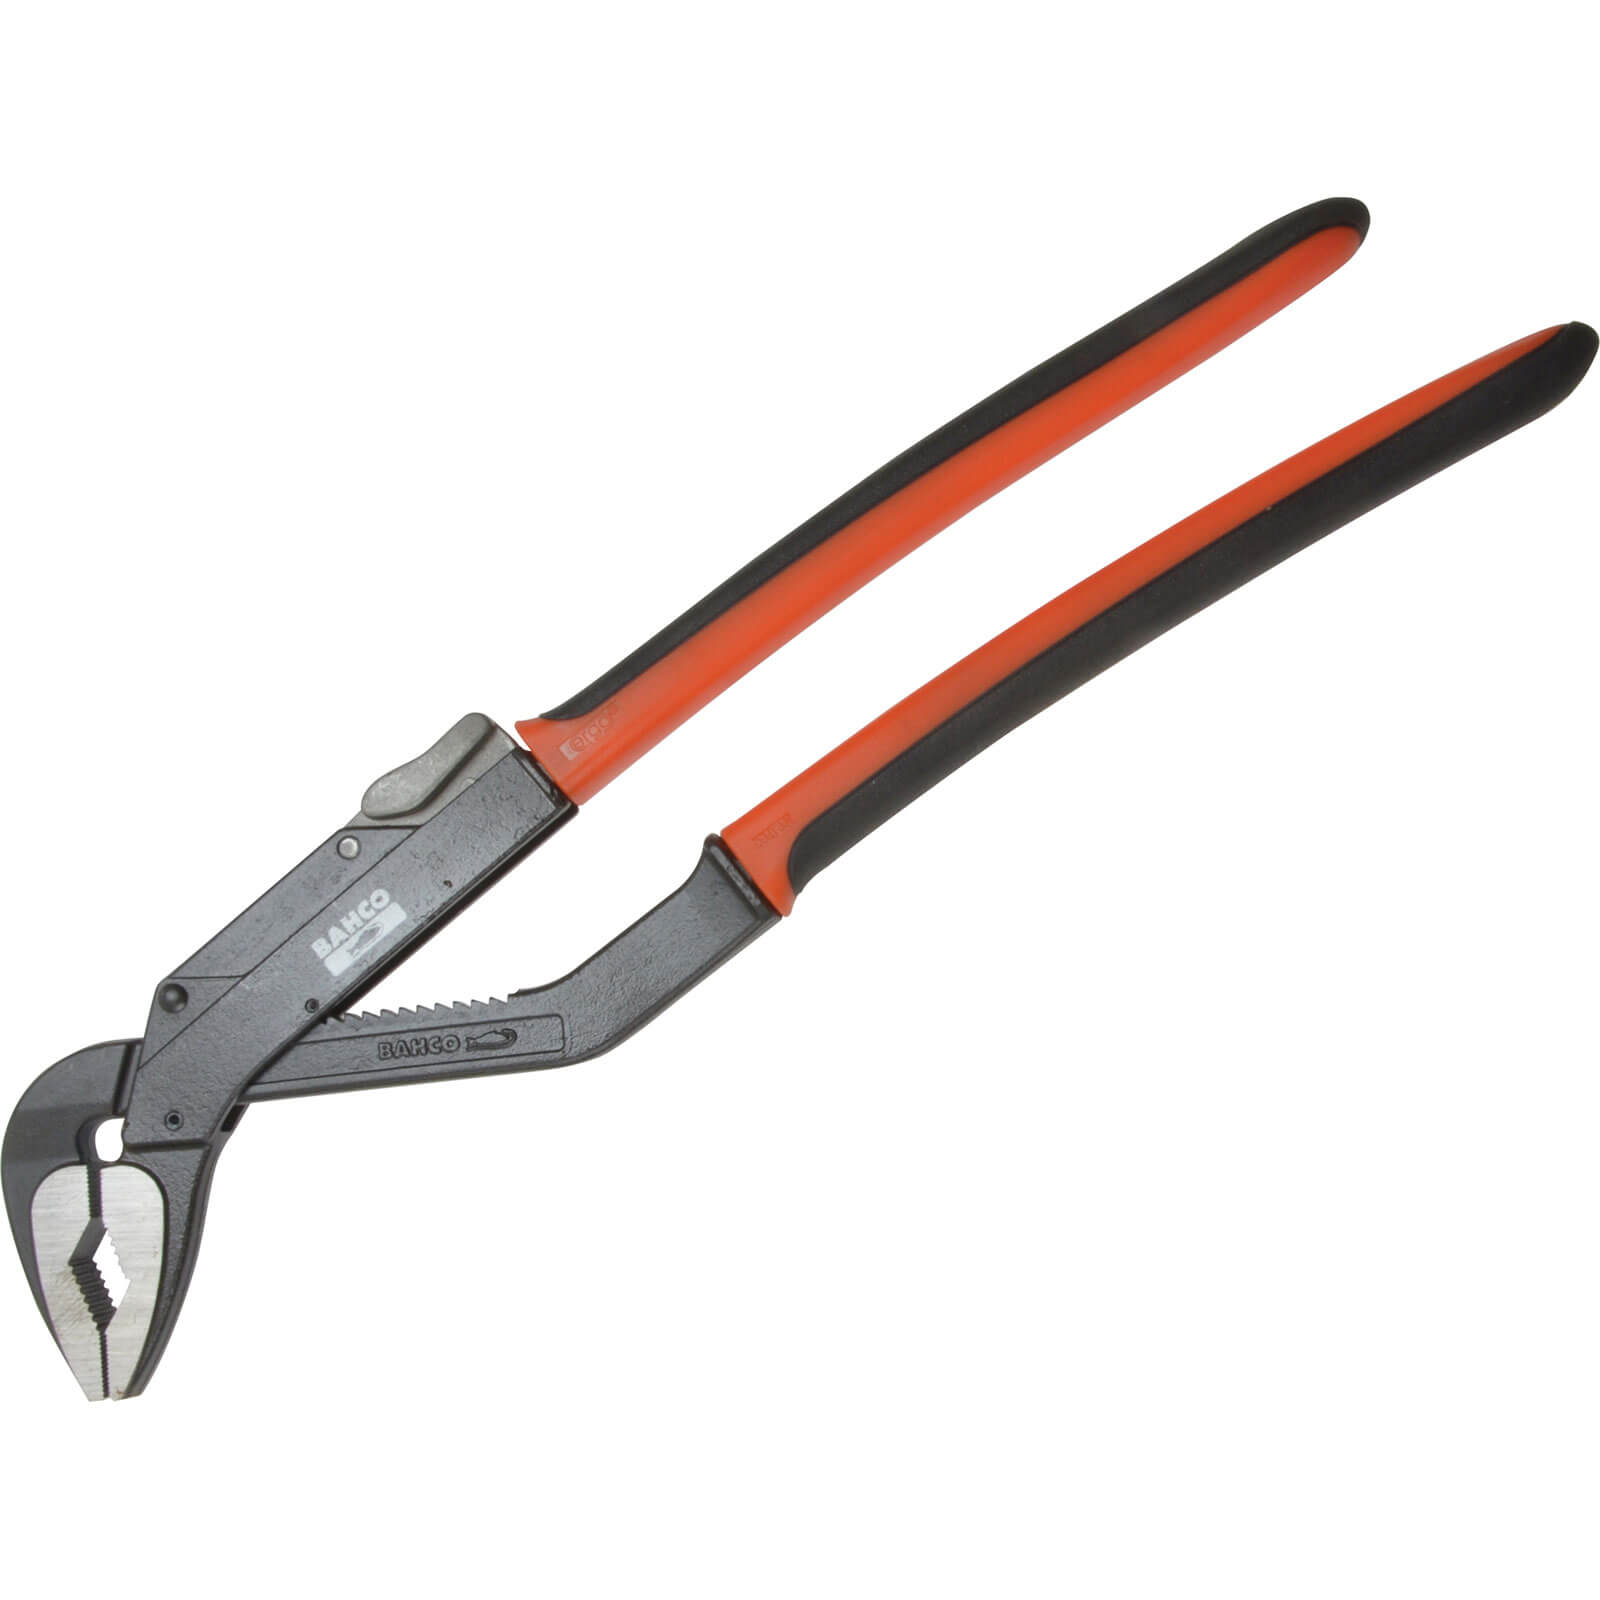 Bahco 822 Slip Joint Pliers Ergo Handle 400mm